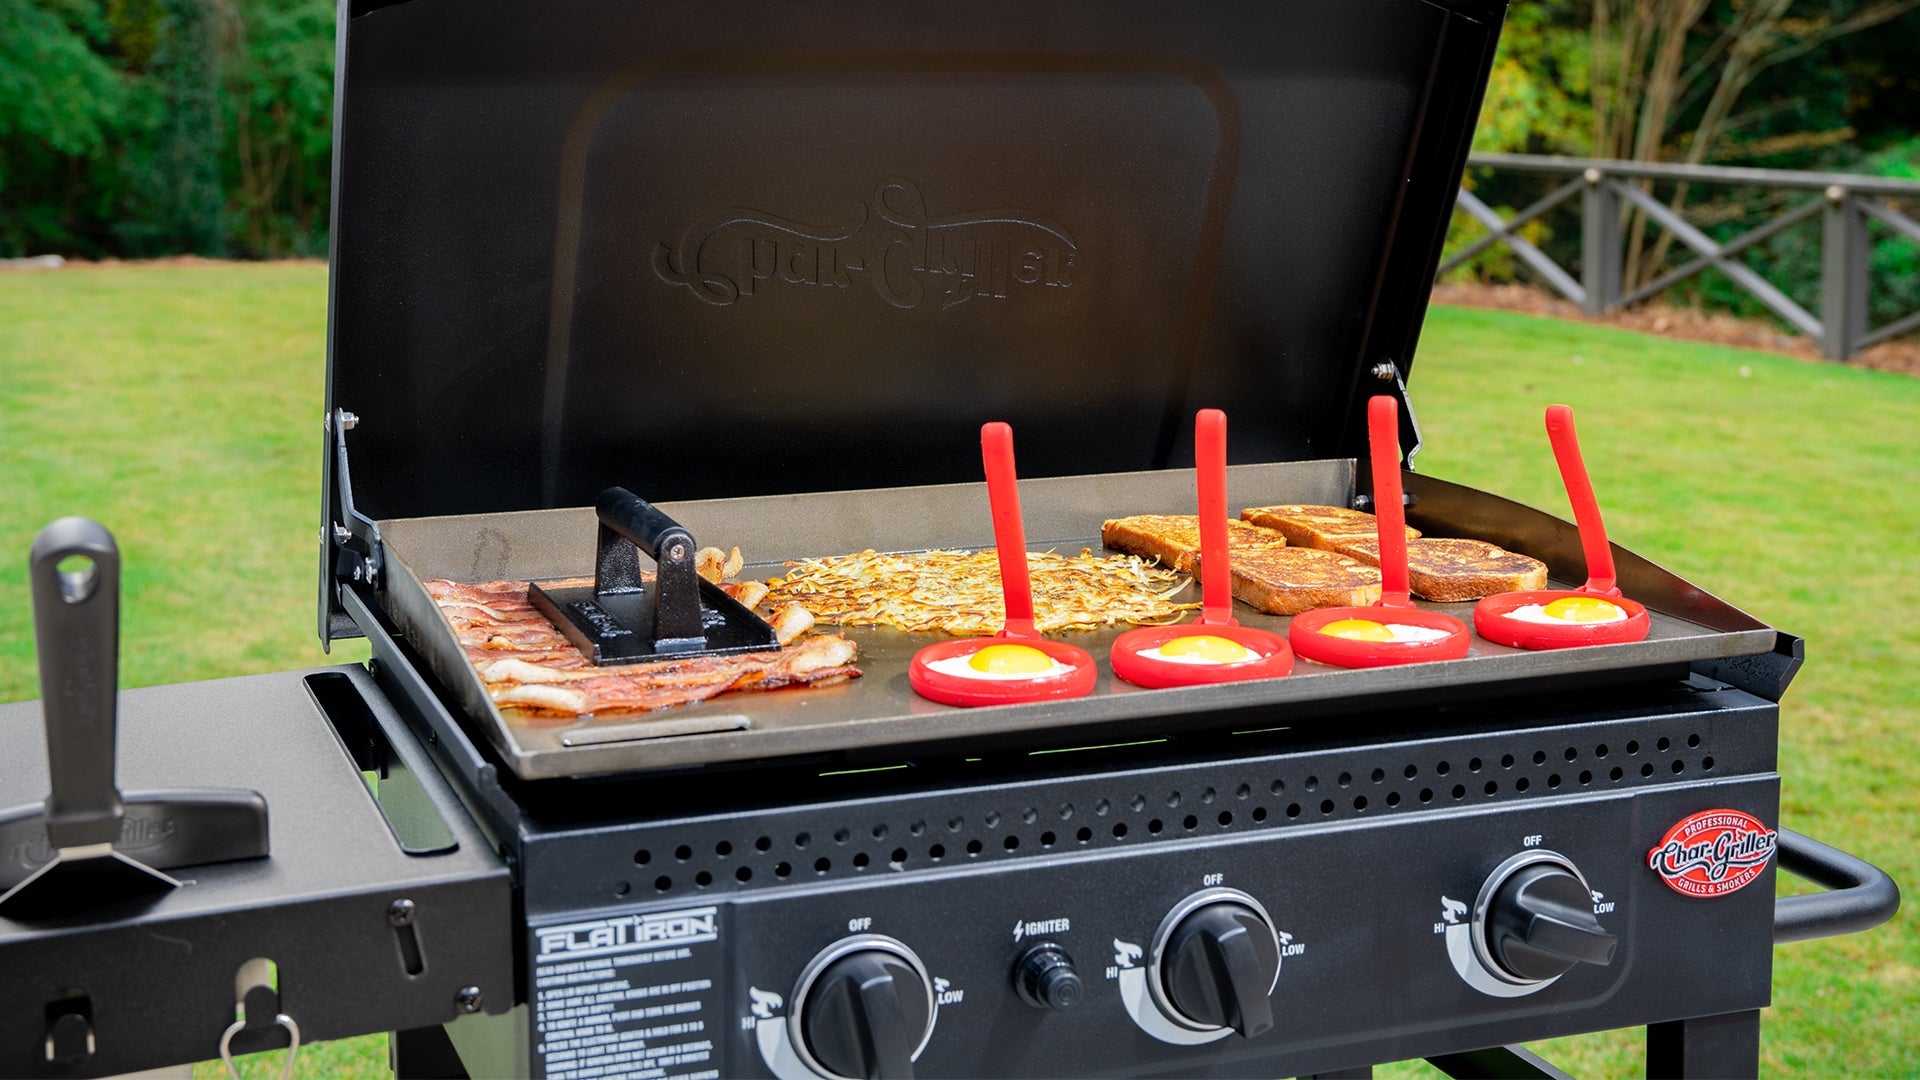 A Flat Iron griddle in use to cook bacon (using a bacon press), hash brown potatoes, French toast, and eggs (using egg rings). A wide spatula is inserted blade-down into a slot on the side shelf to the left. A green lawn and trees are in the background.